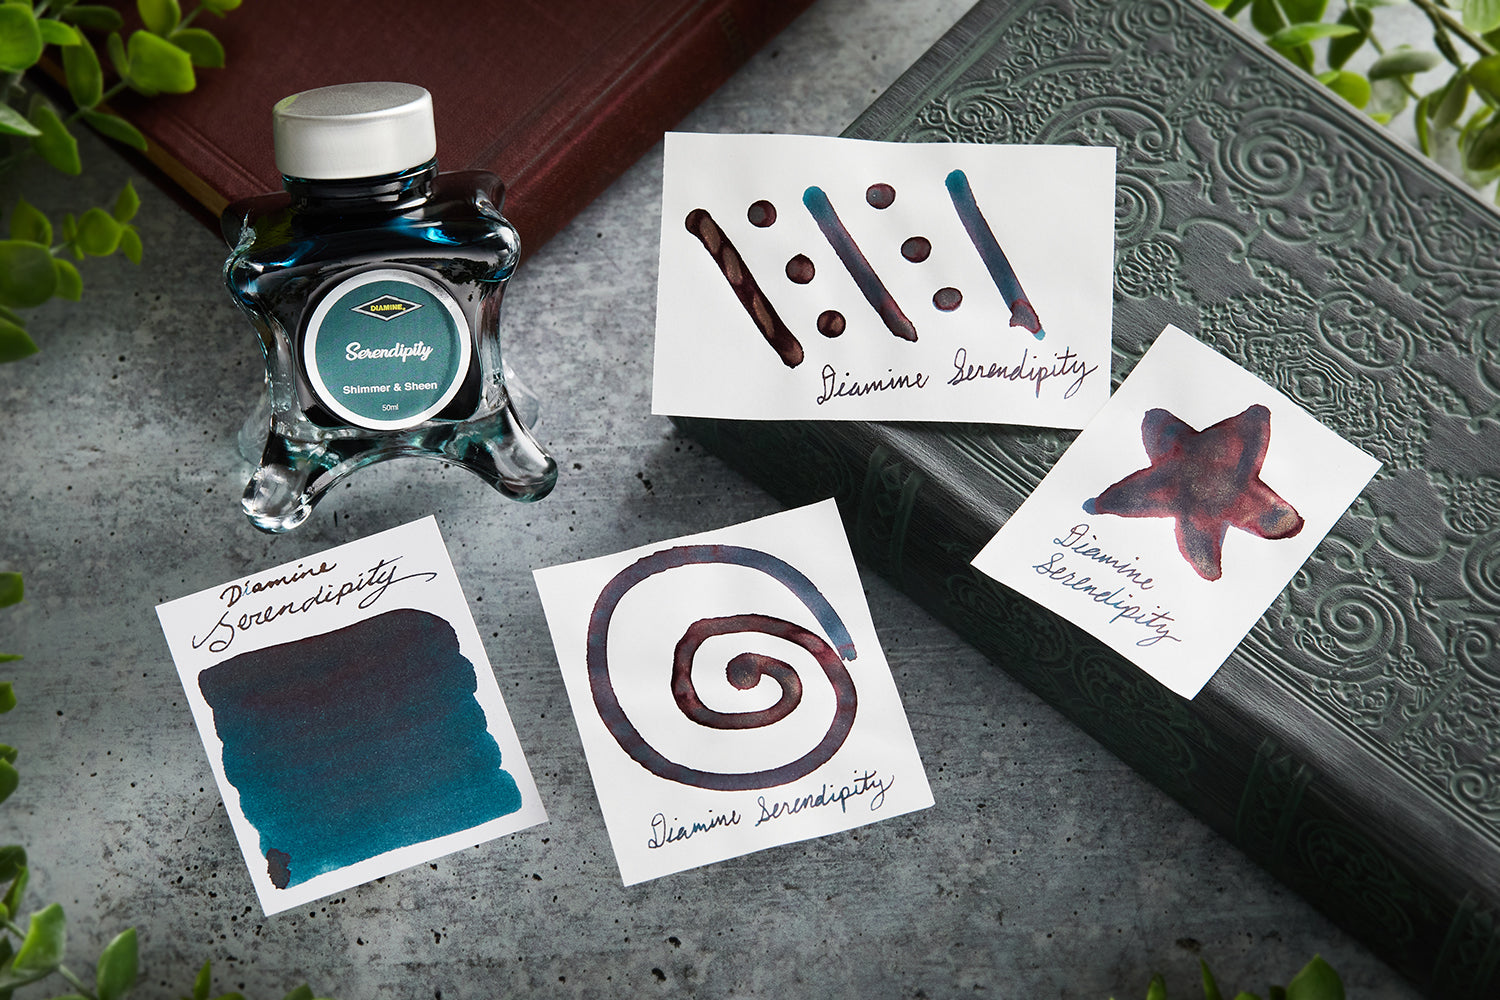 Diamine Serendipity fountain pen ink bottle along with 4 white cards that have ink swabs, symbols, or doodles, with a gray background